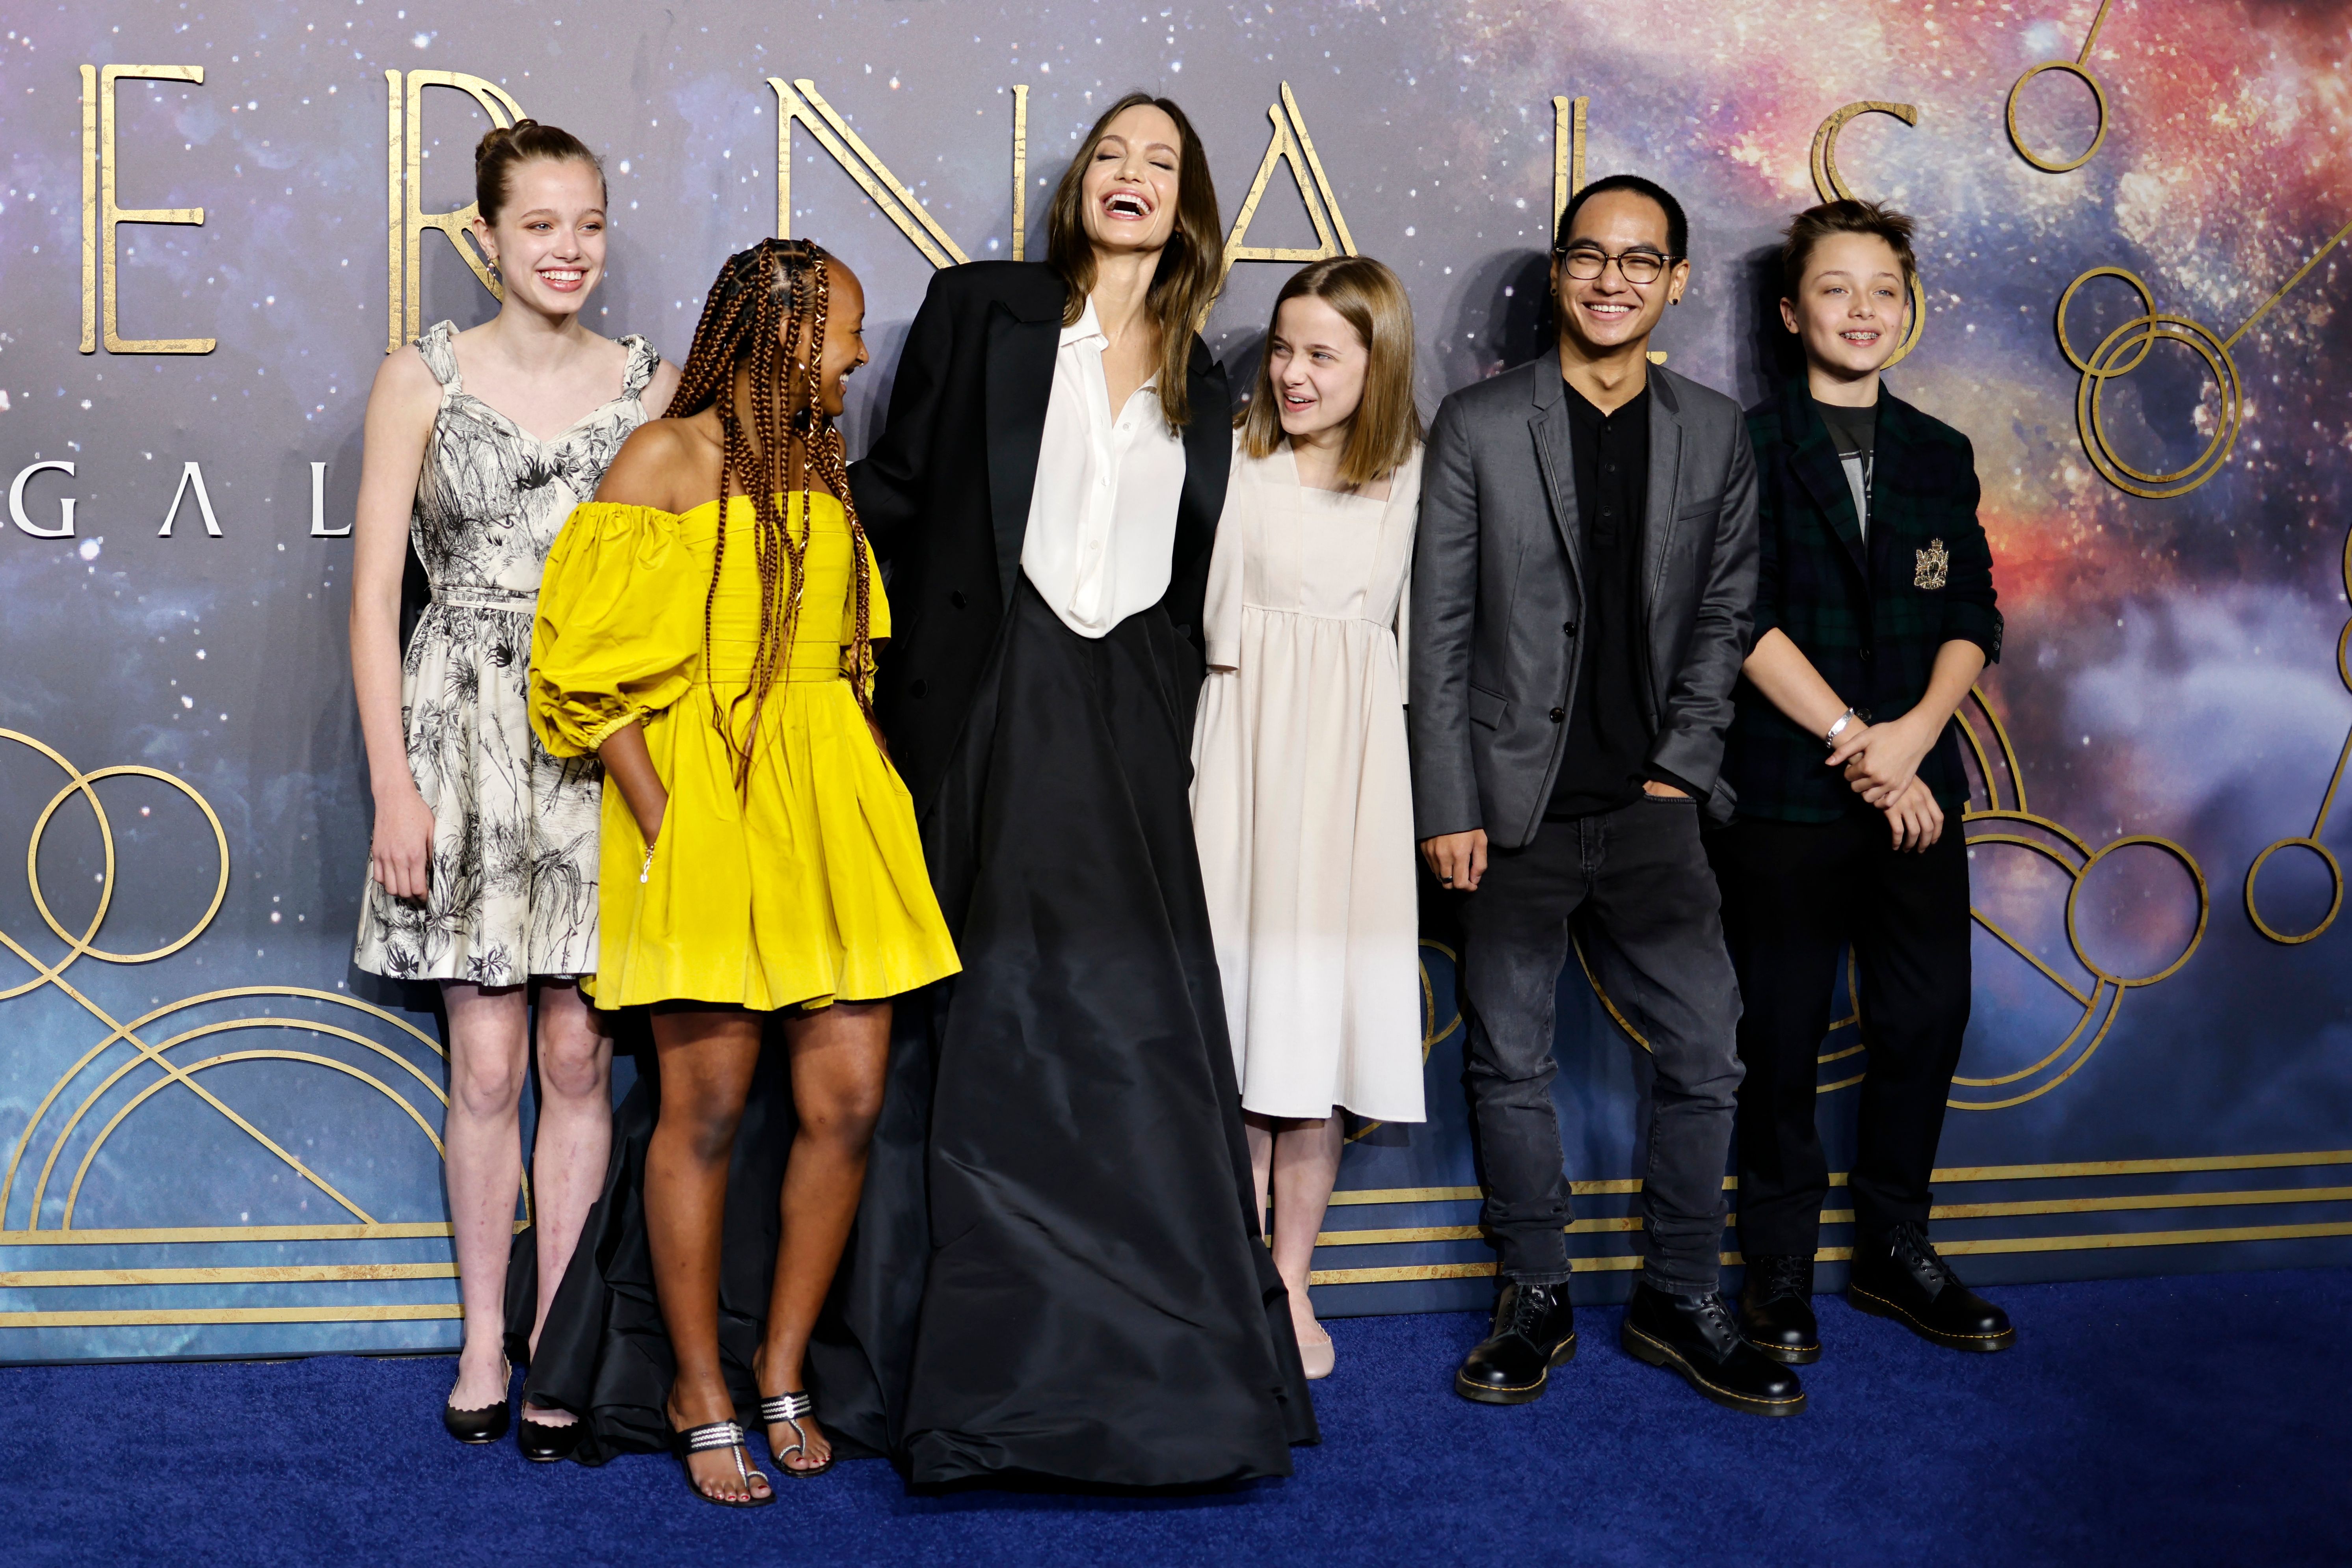 Angelina Jolie with her children Shiloh, Zahara, Vivienne, Maddox, and Knox at the "Eternals" screening in London in 2021 | Source: Getty Images